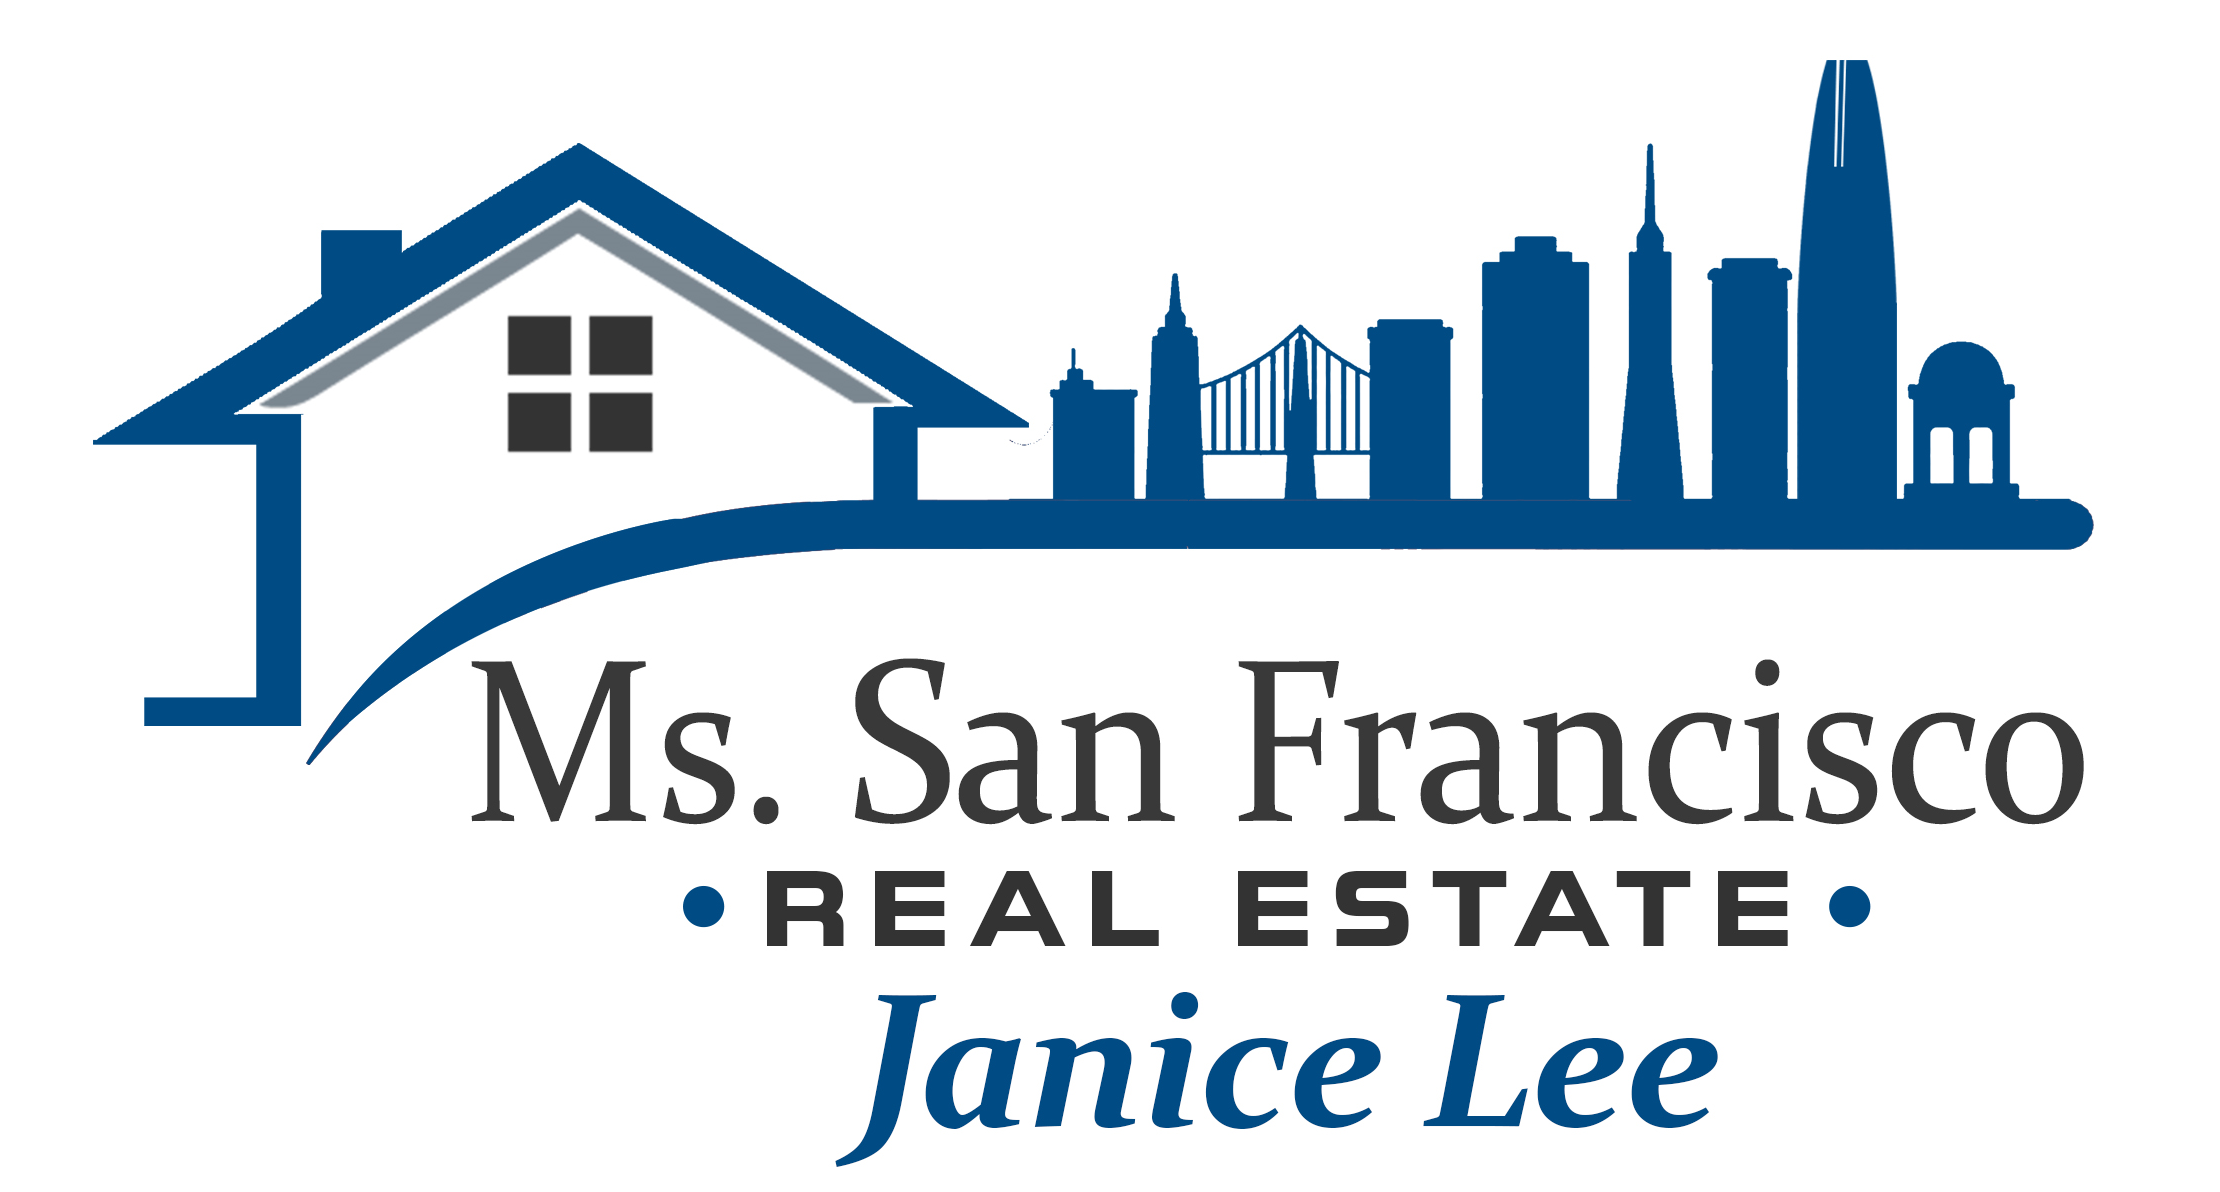 Best real estate agent in San Francisco